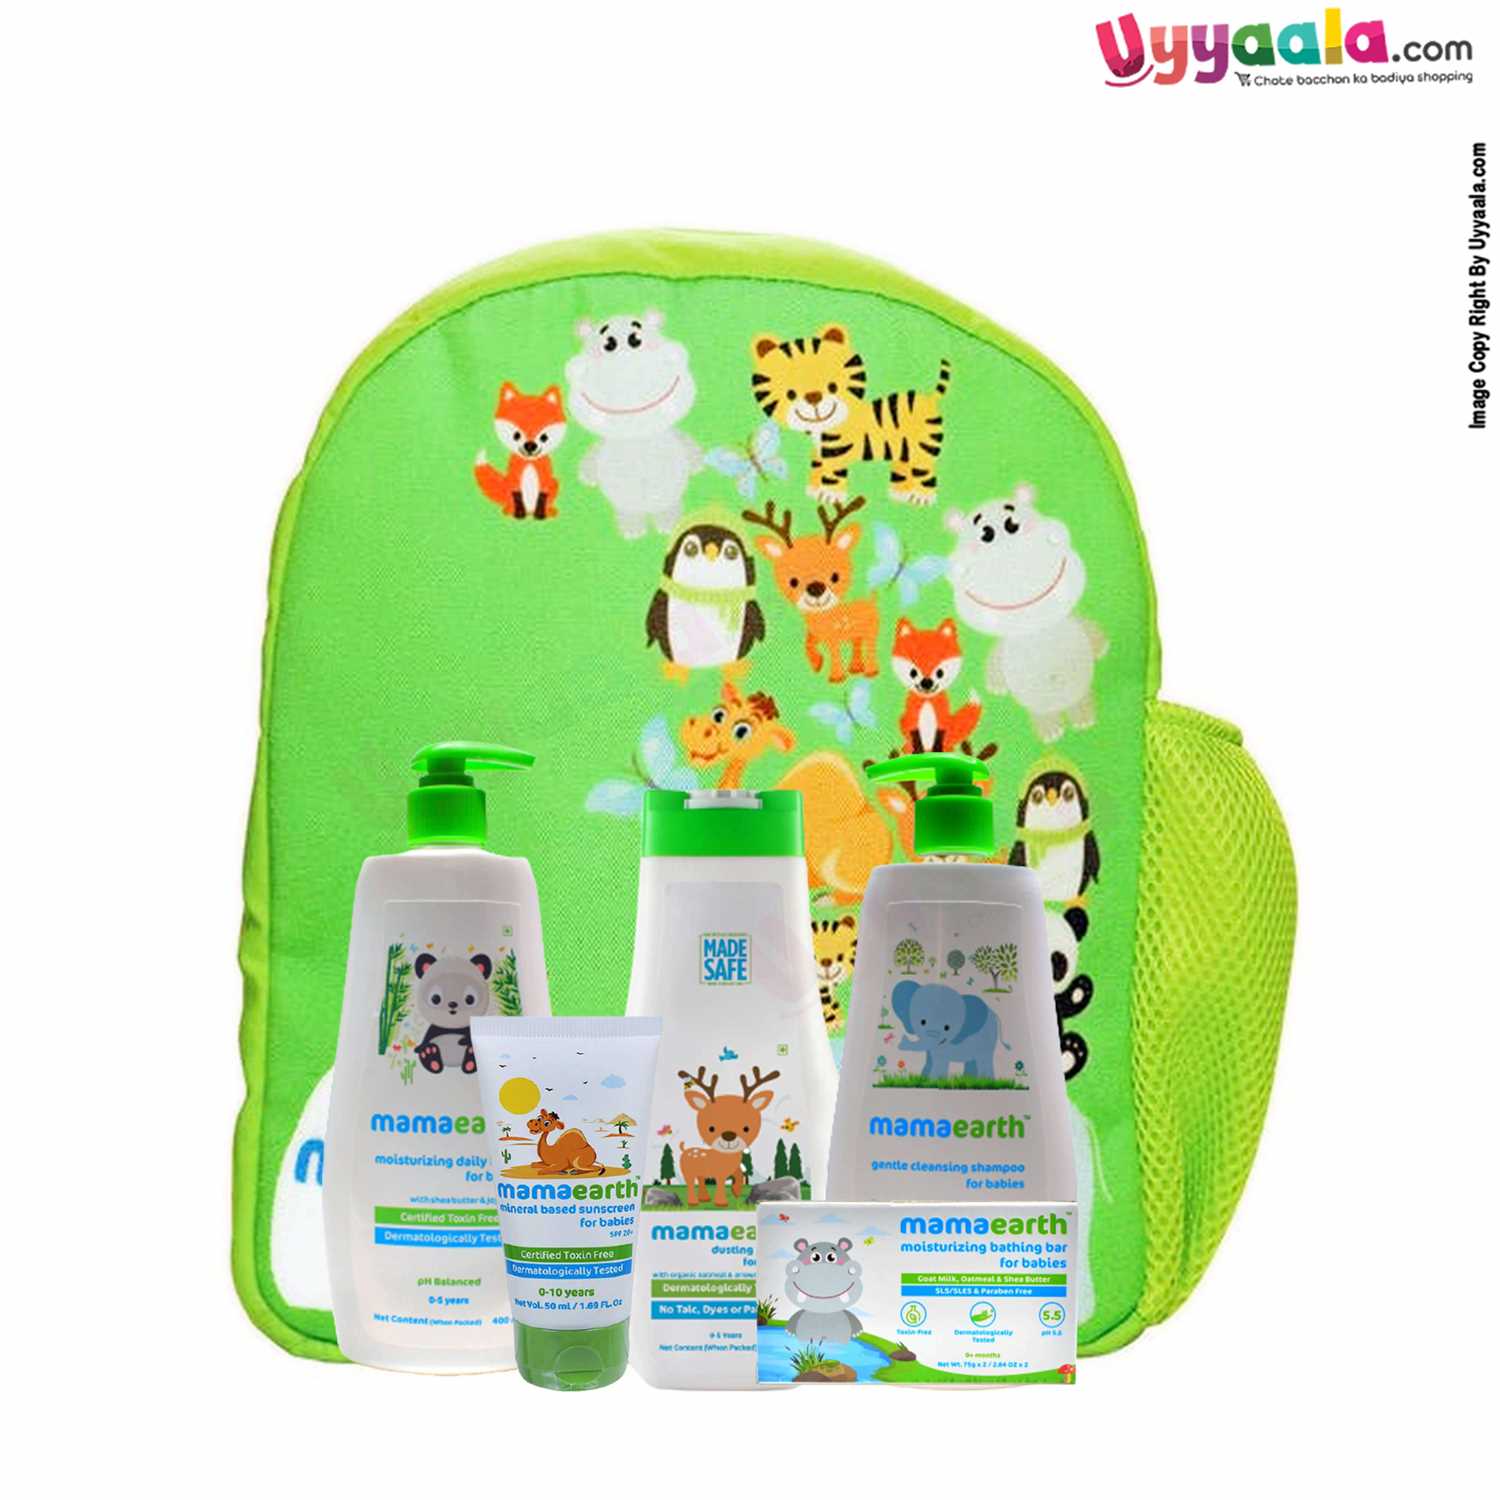 Mamaearth's Baby Summer Care Value Kit with Free Smart Bag Back Pack